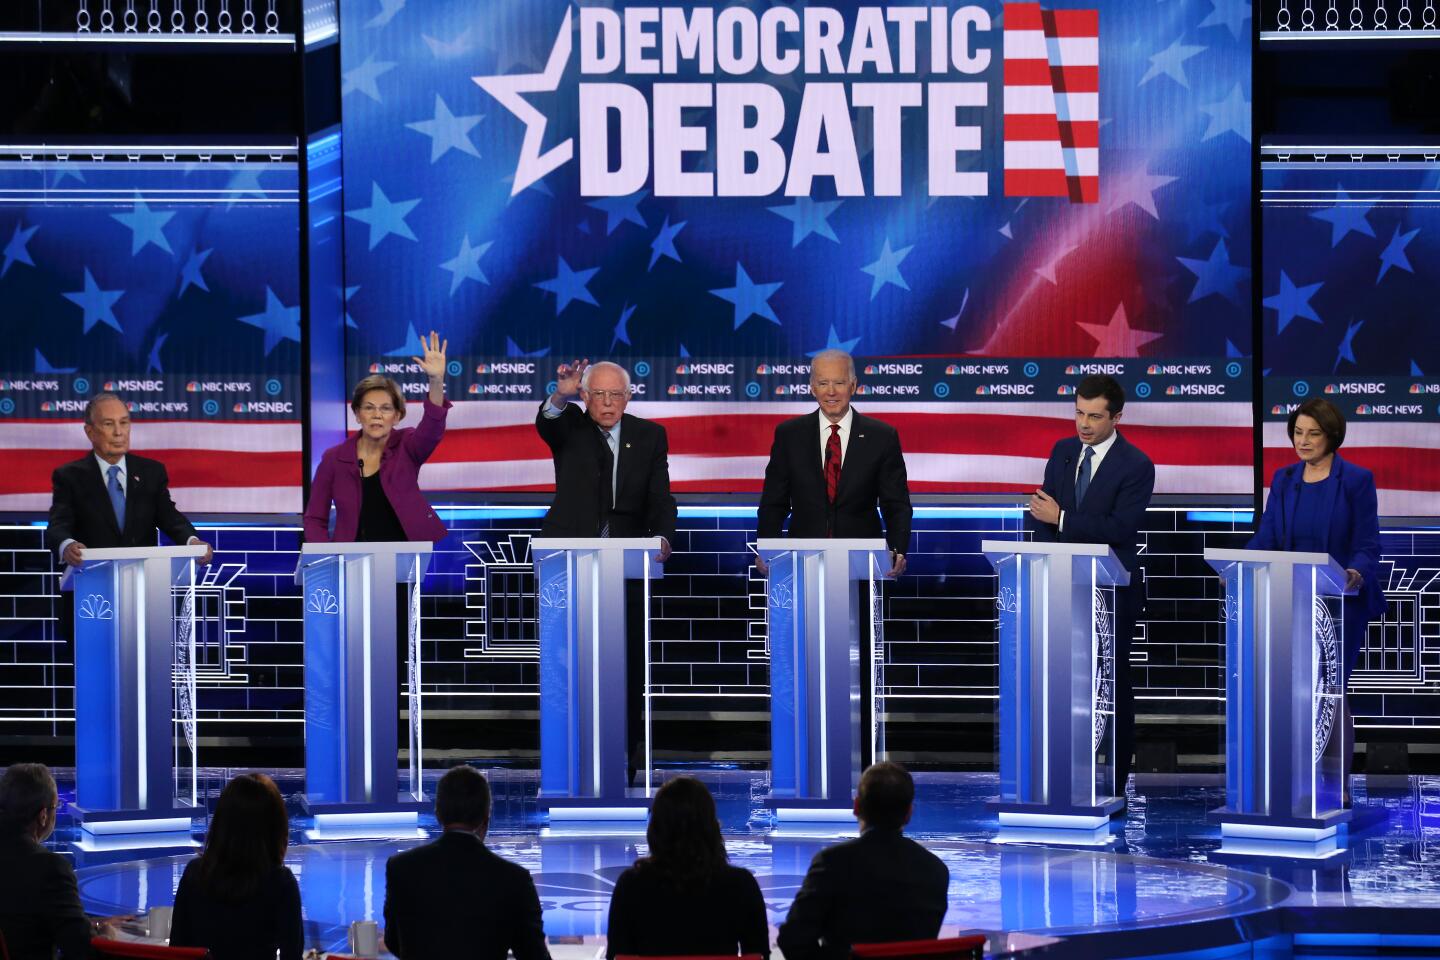 Democratic presidential candidates appeal to Nevada voters at Wednesday's debate in Las Vegas.